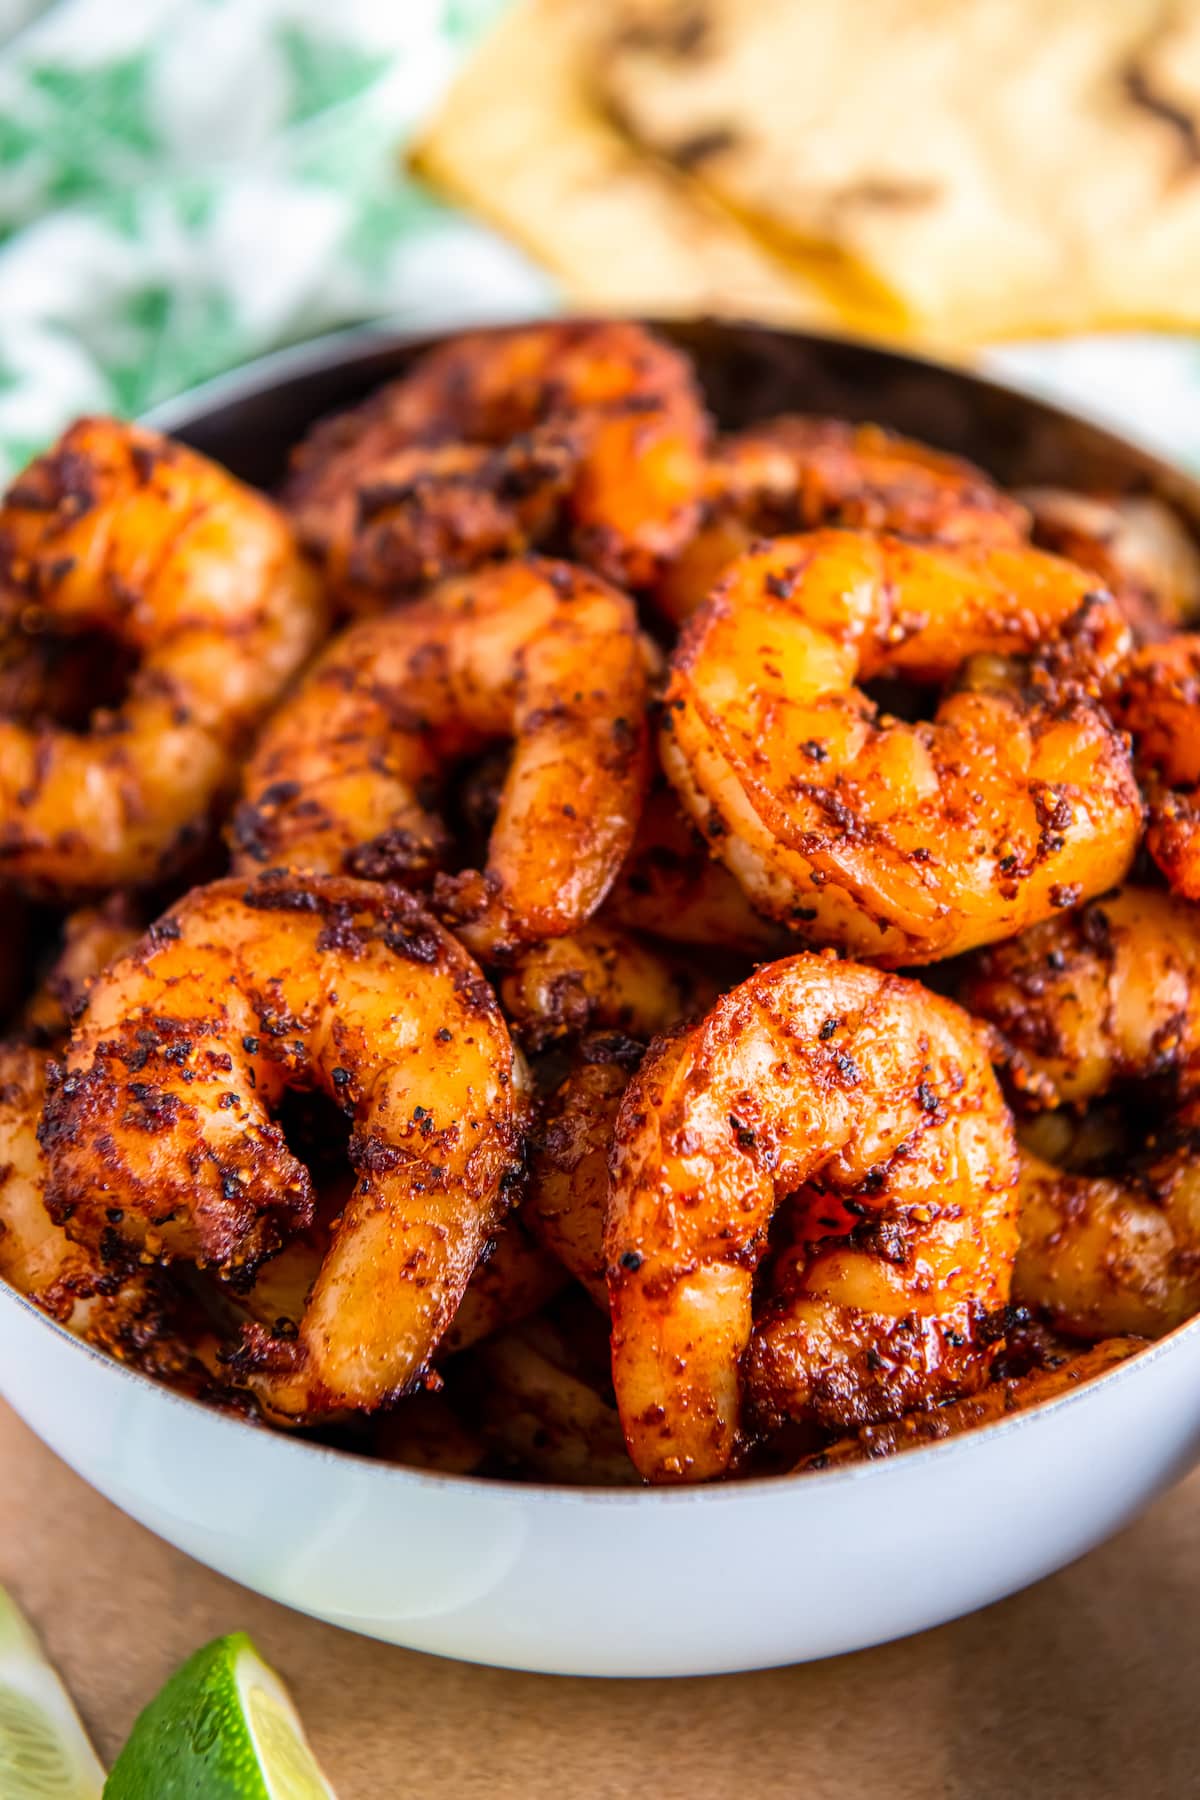 Cooked and seasoned shrimp in a bowl.